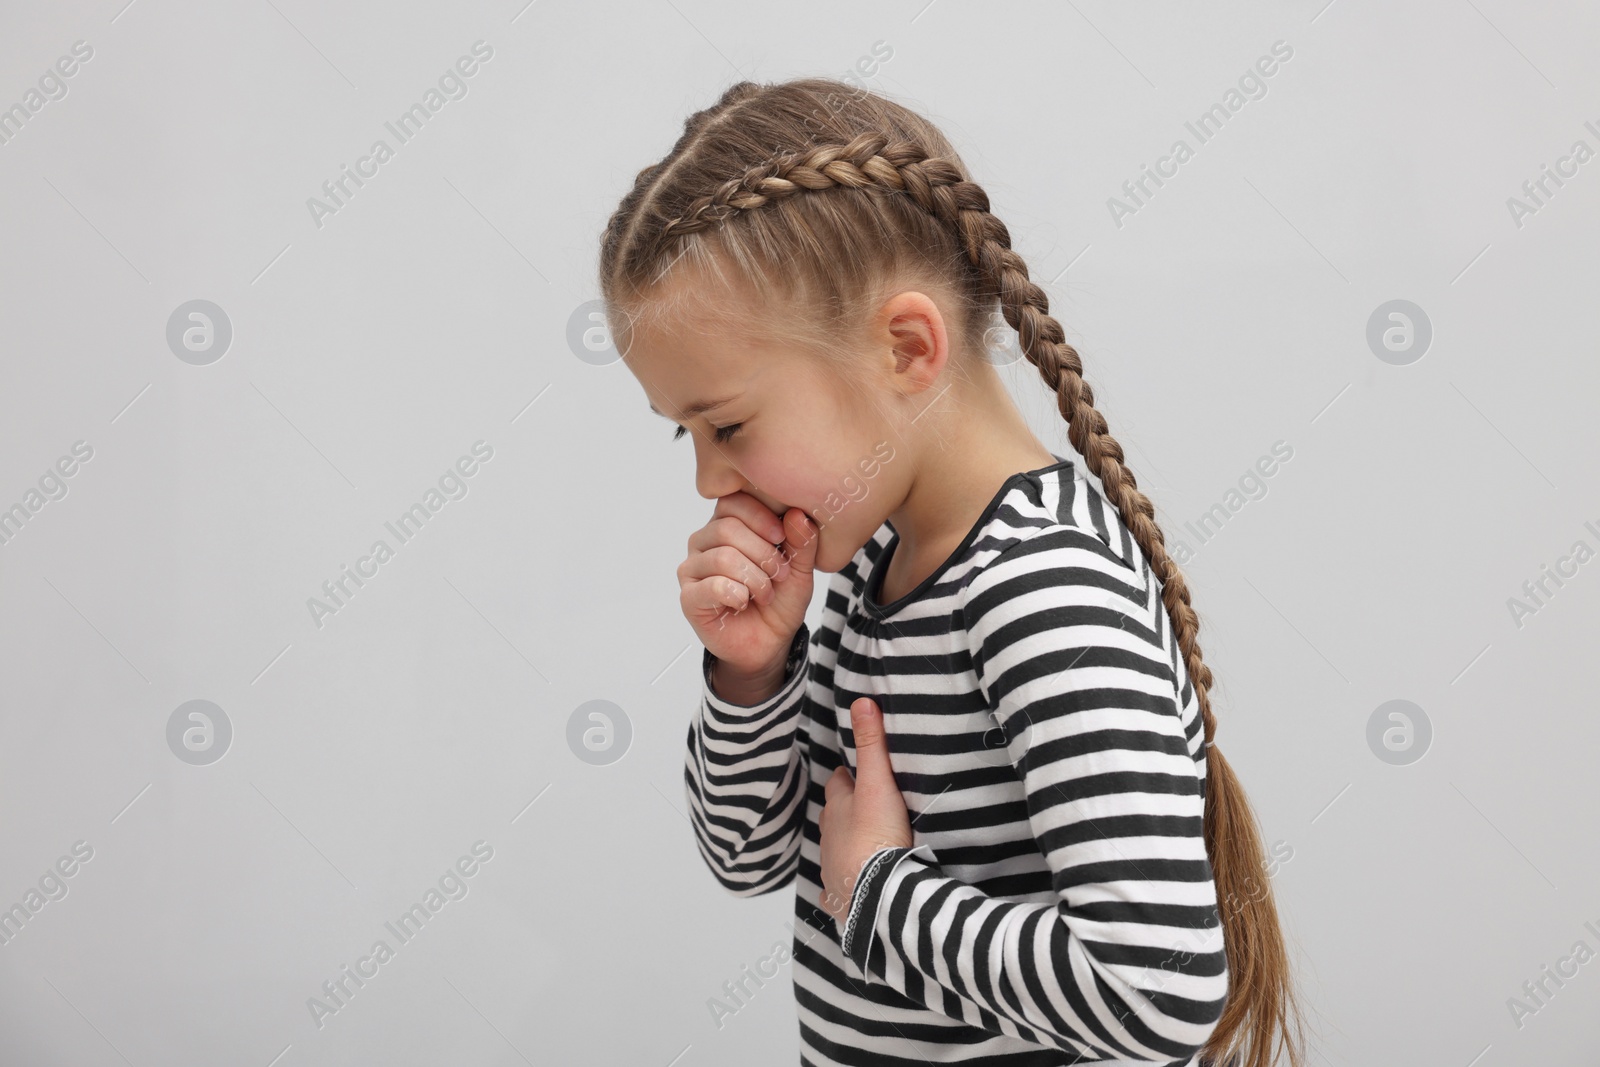 Photo of Sick girl coughing on gray background. Cold symptoms